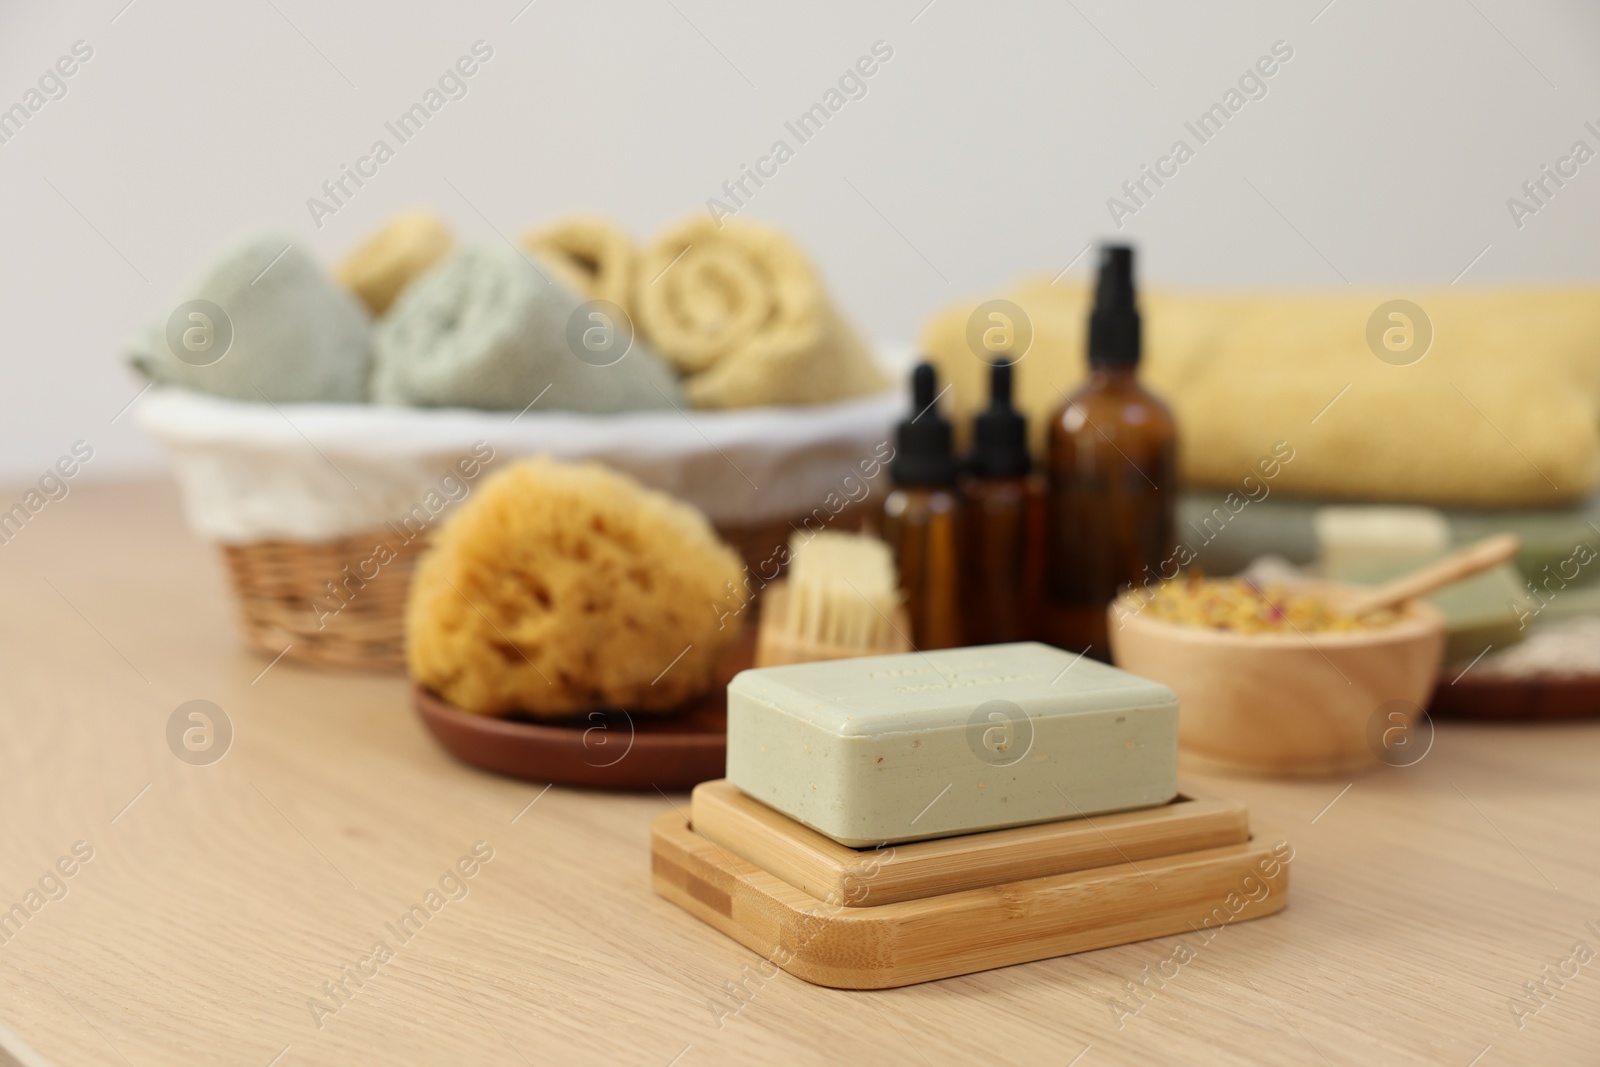 Photo of Soap bar, sponge and bottles of essential oils on light wooden table. Spa therapy